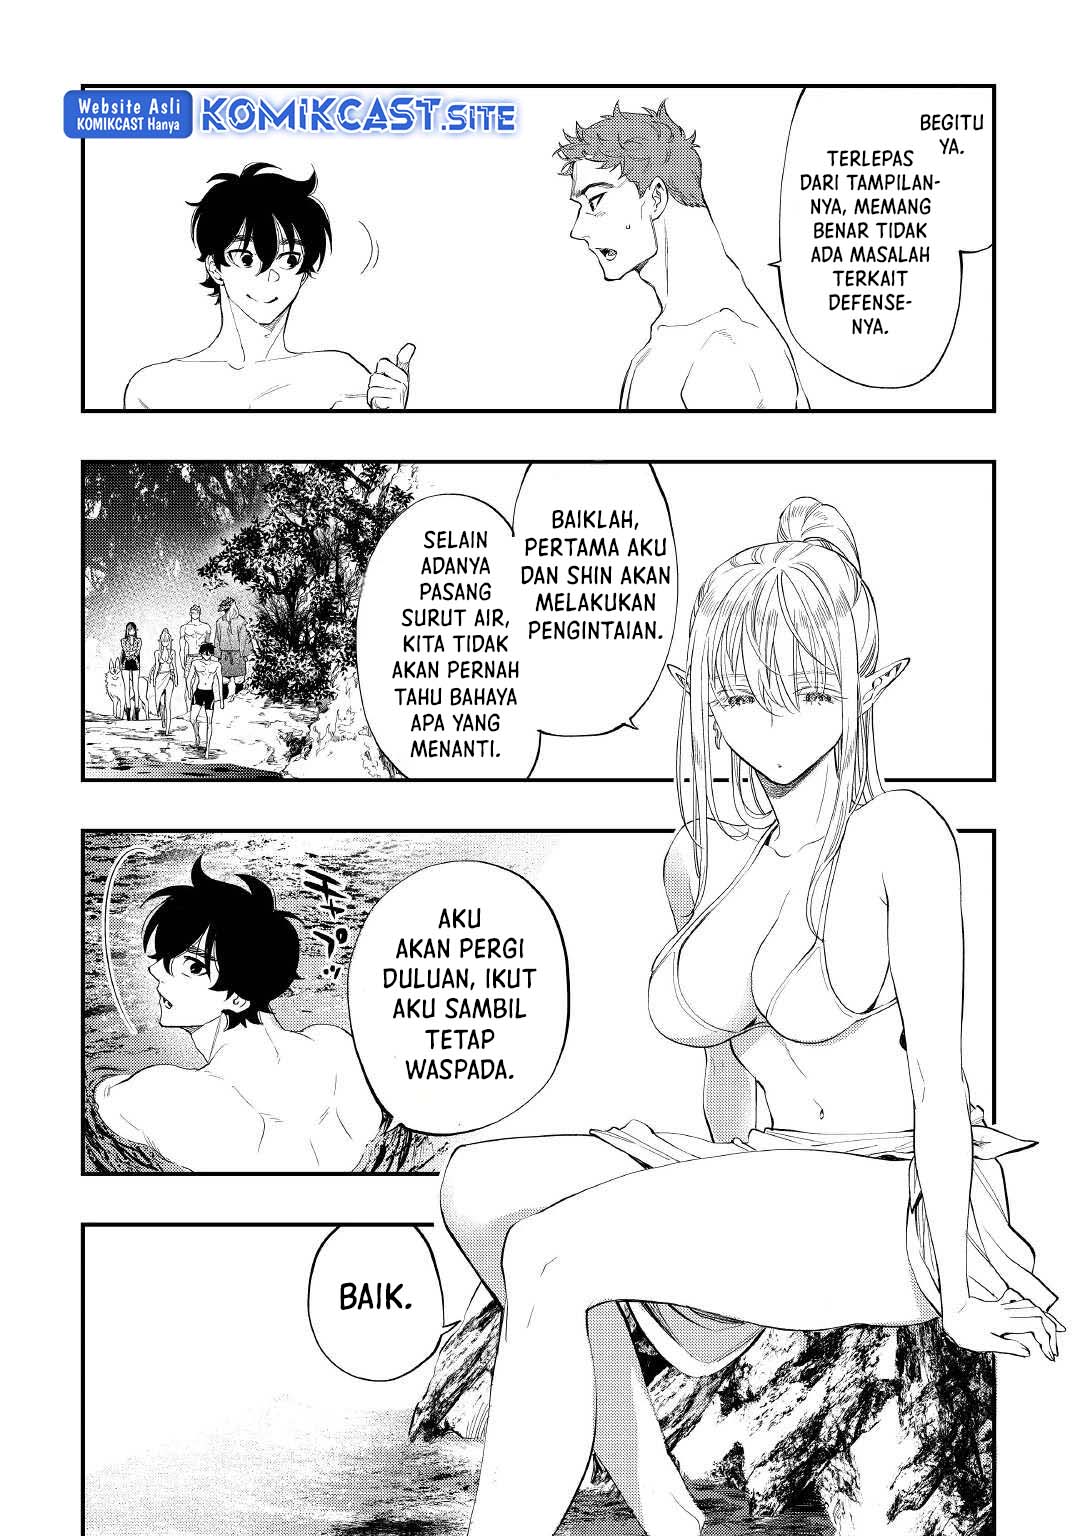 The New Gate Chapter 87 Bahasa Indonesia